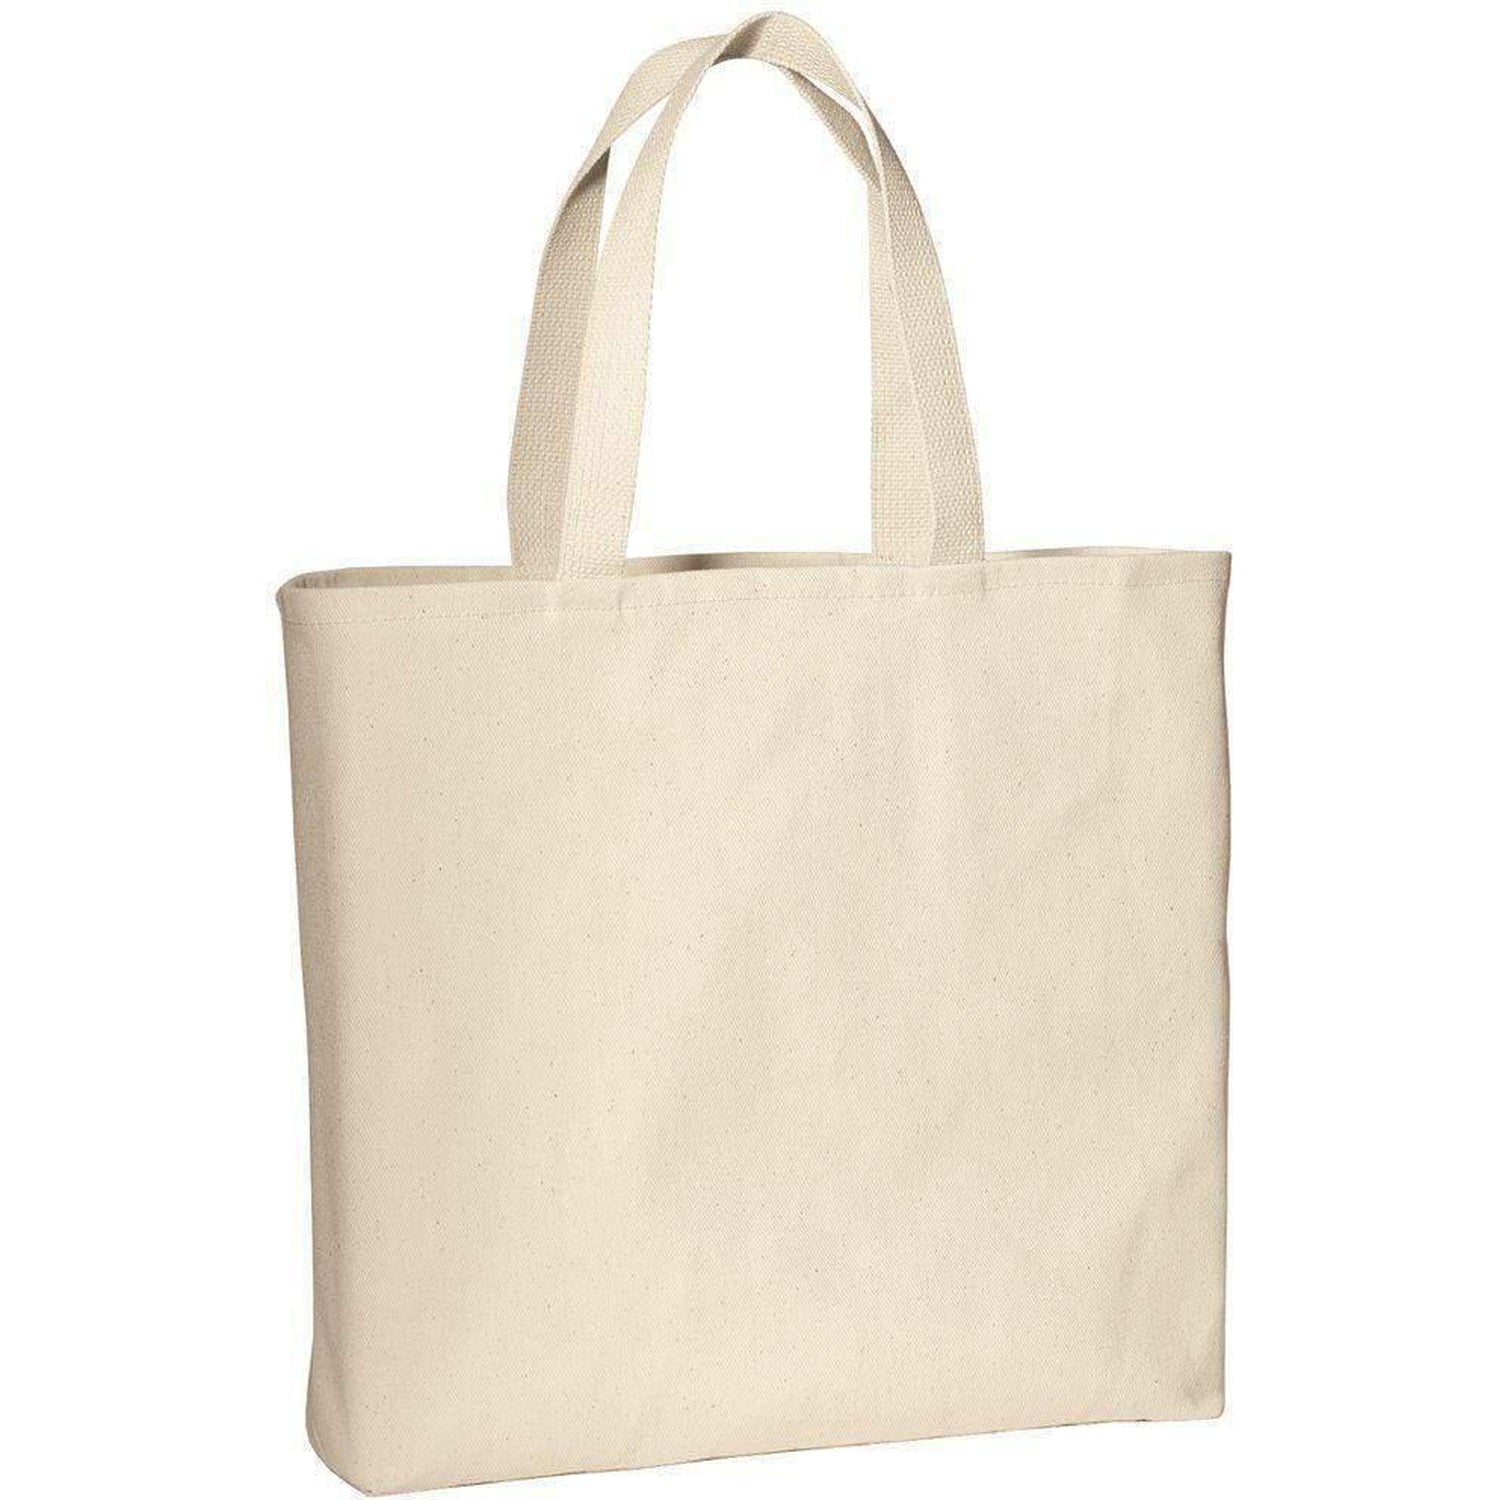 Wholesale Cotton Canvas Tote Bags in Bulk - Twill Convention Tote Bags ...